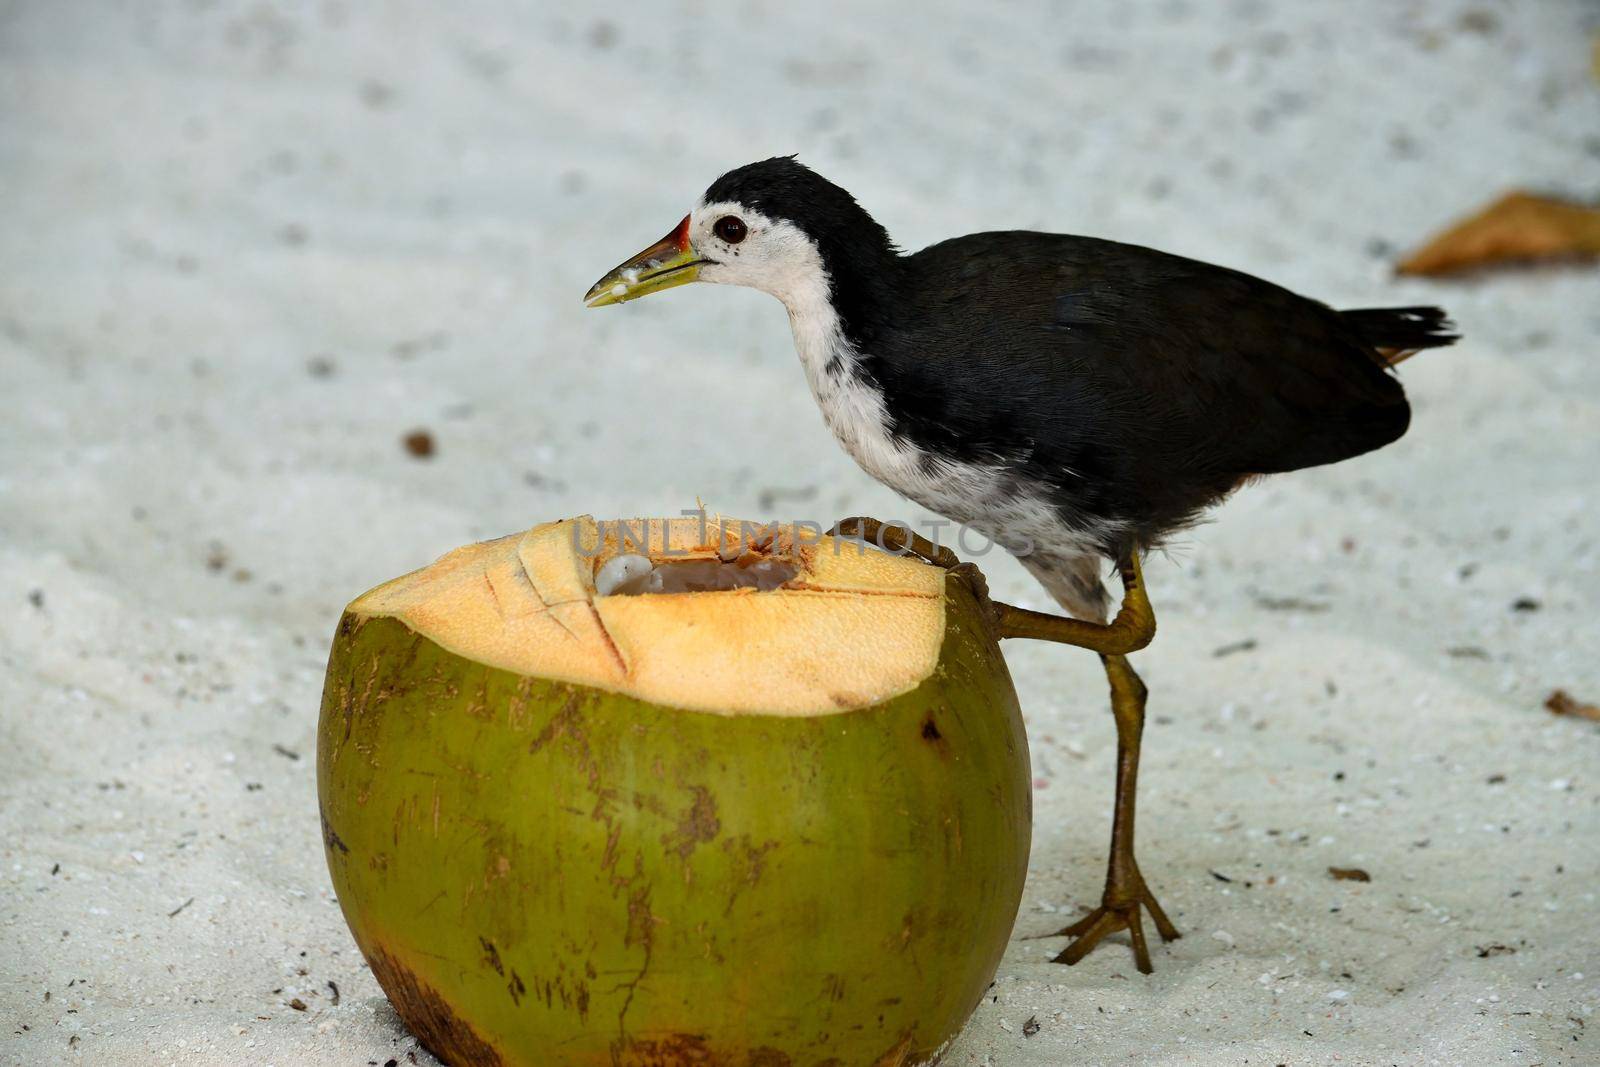 White-breasted Waterhen while feeding of a coconut, Indian Ocean.